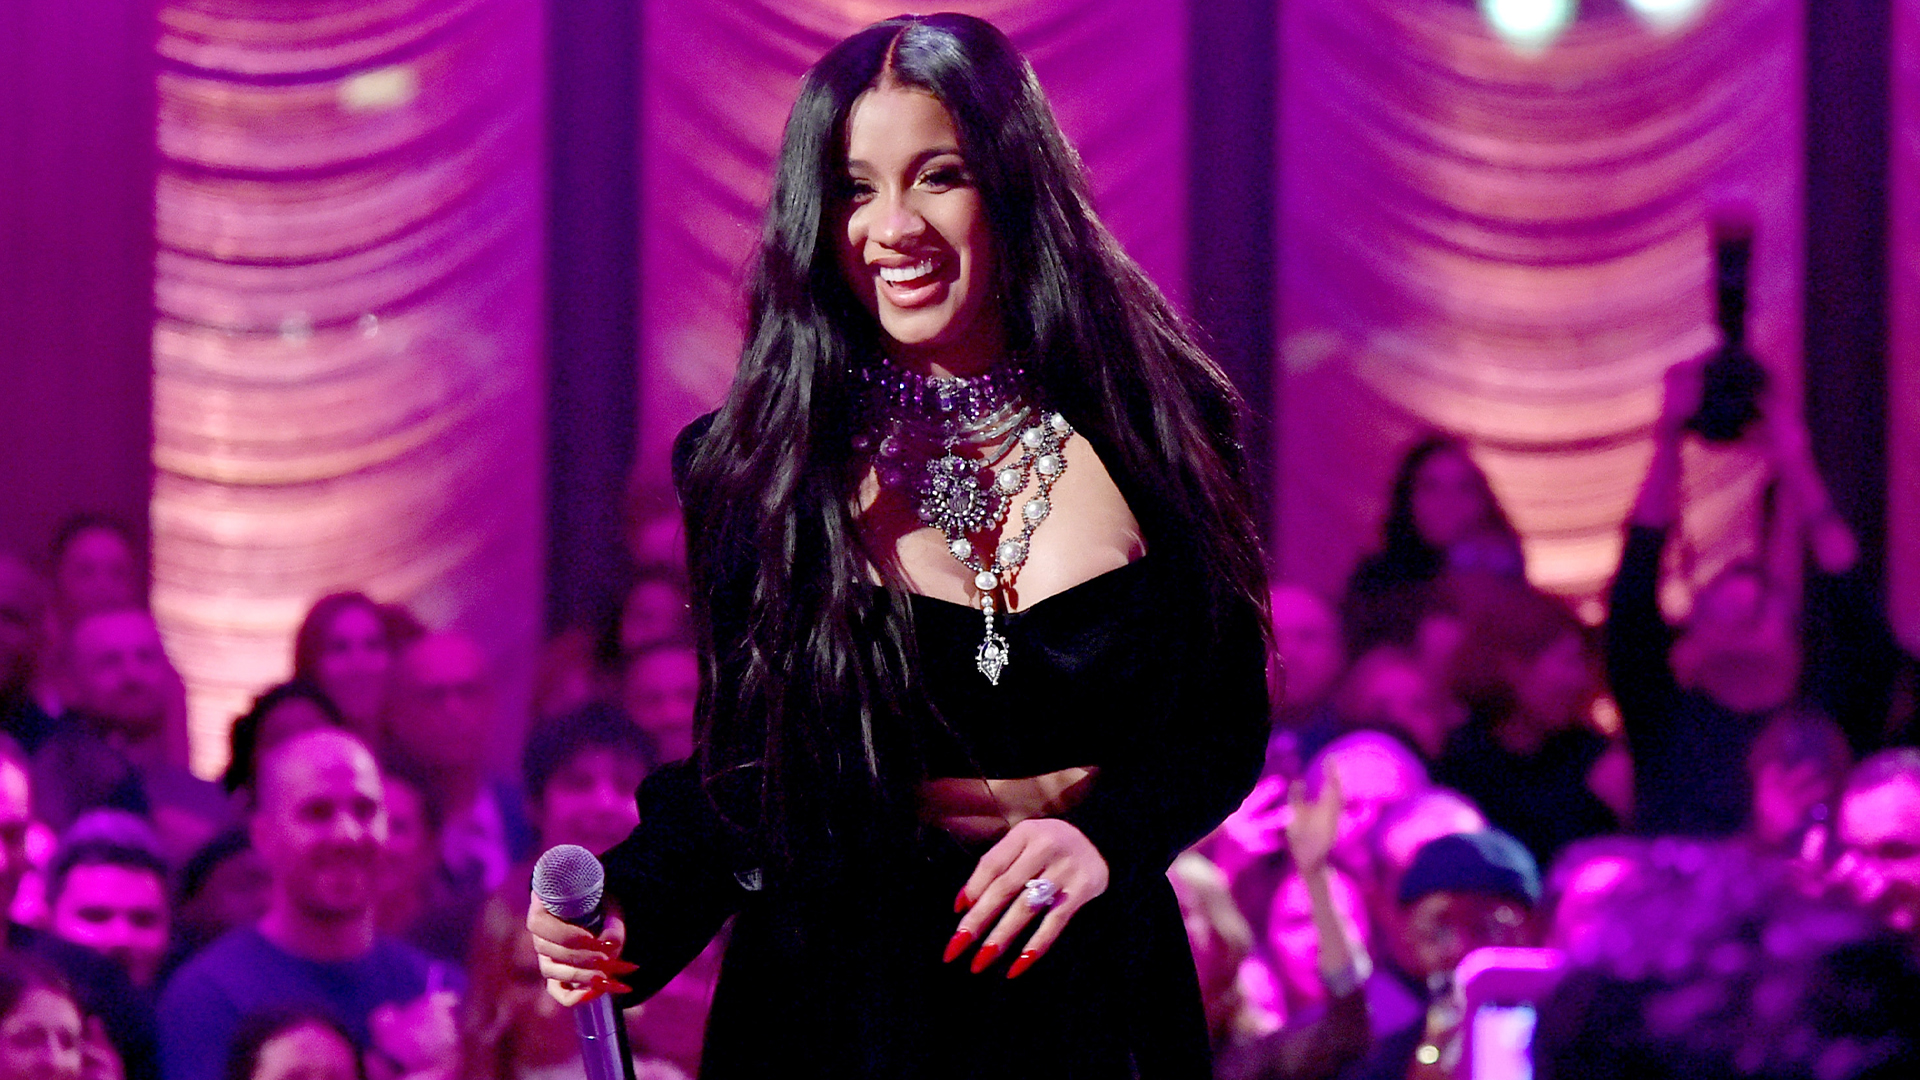 Cardi B Built A $40M Net Worth Making 'Money Moves' — But Not All Of Her Fortune Comes From Hip-Hop